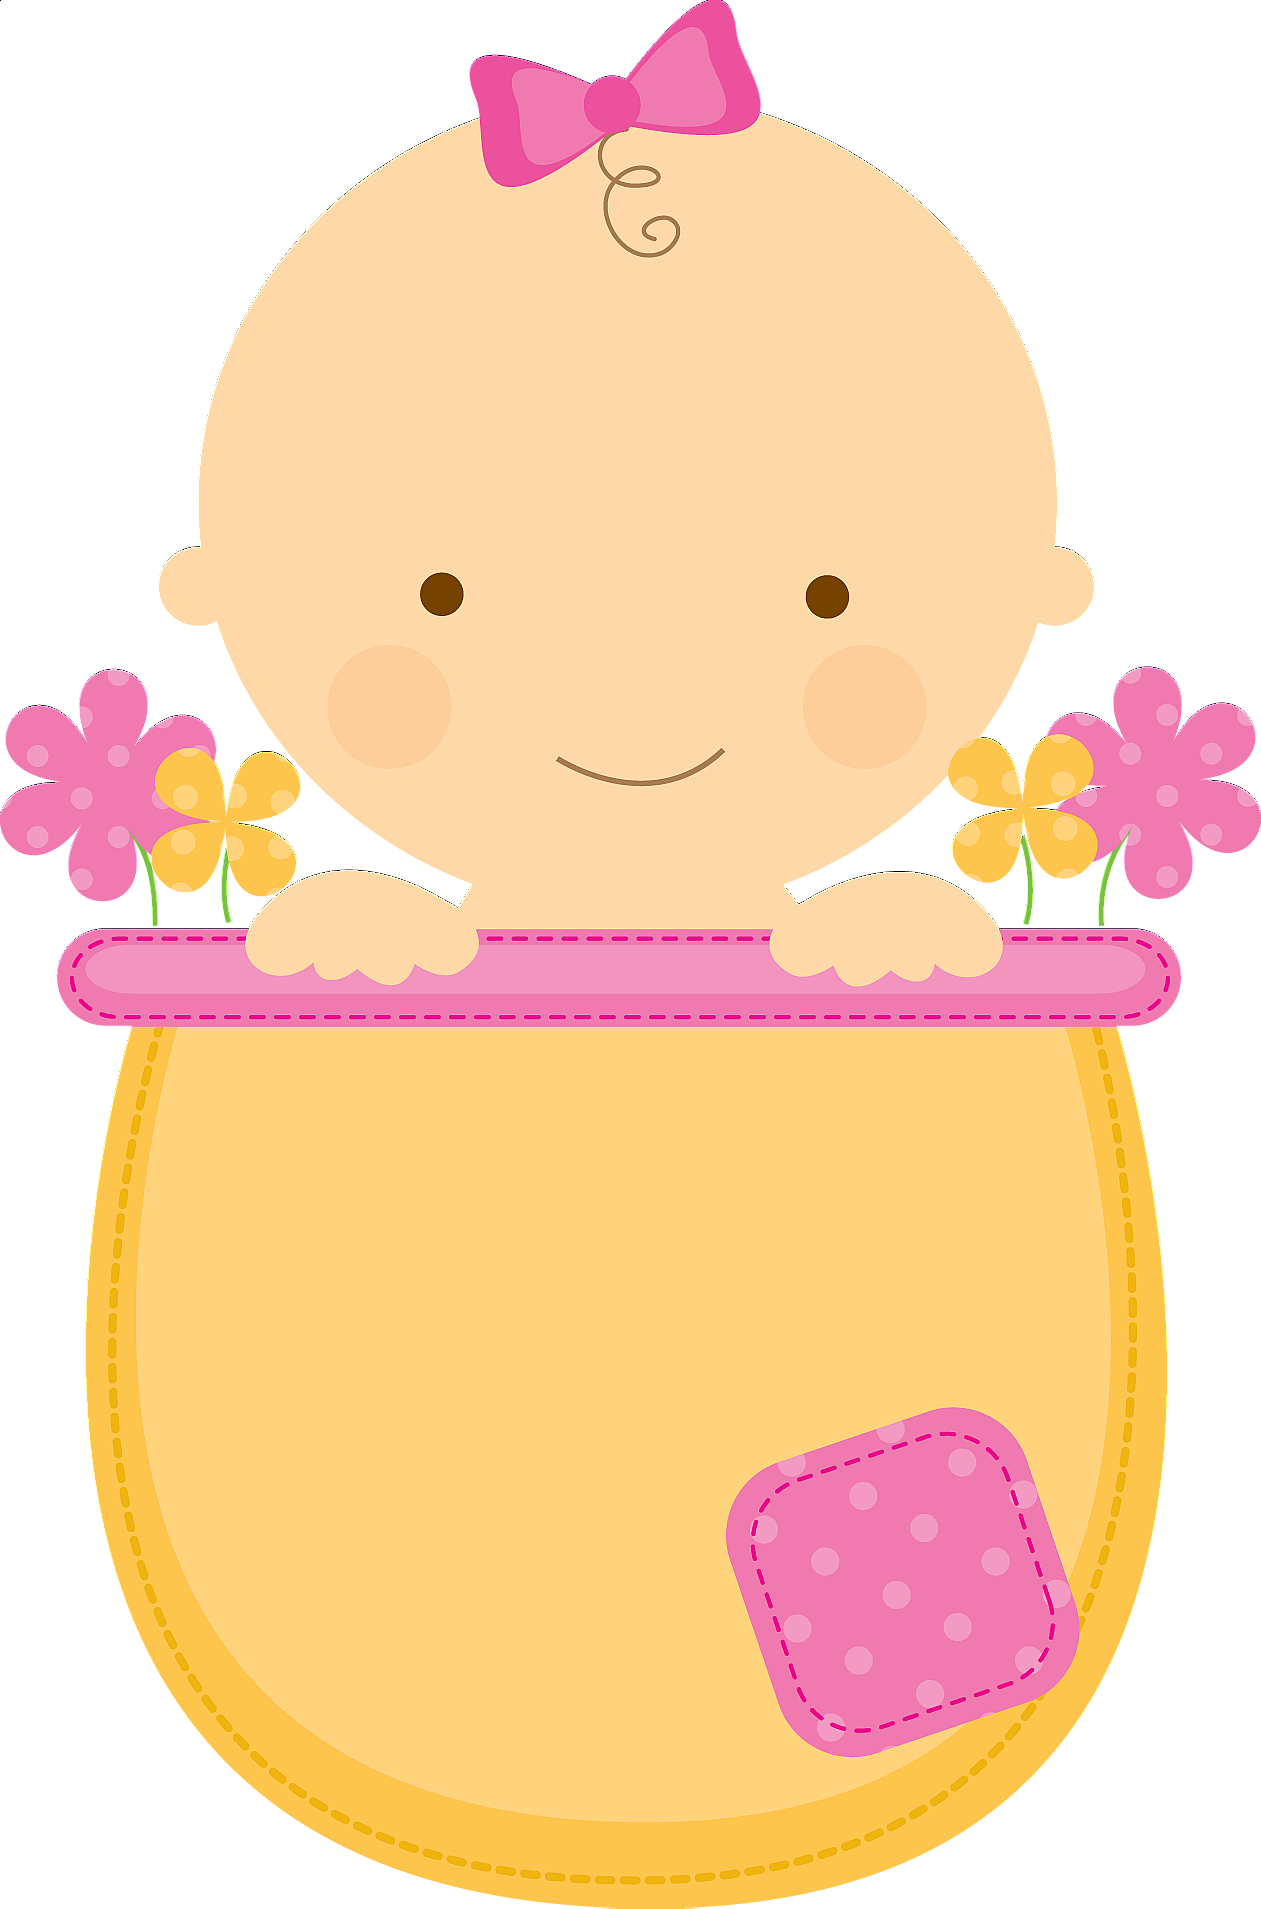 Infant clipart baby toy. Light pink girl items